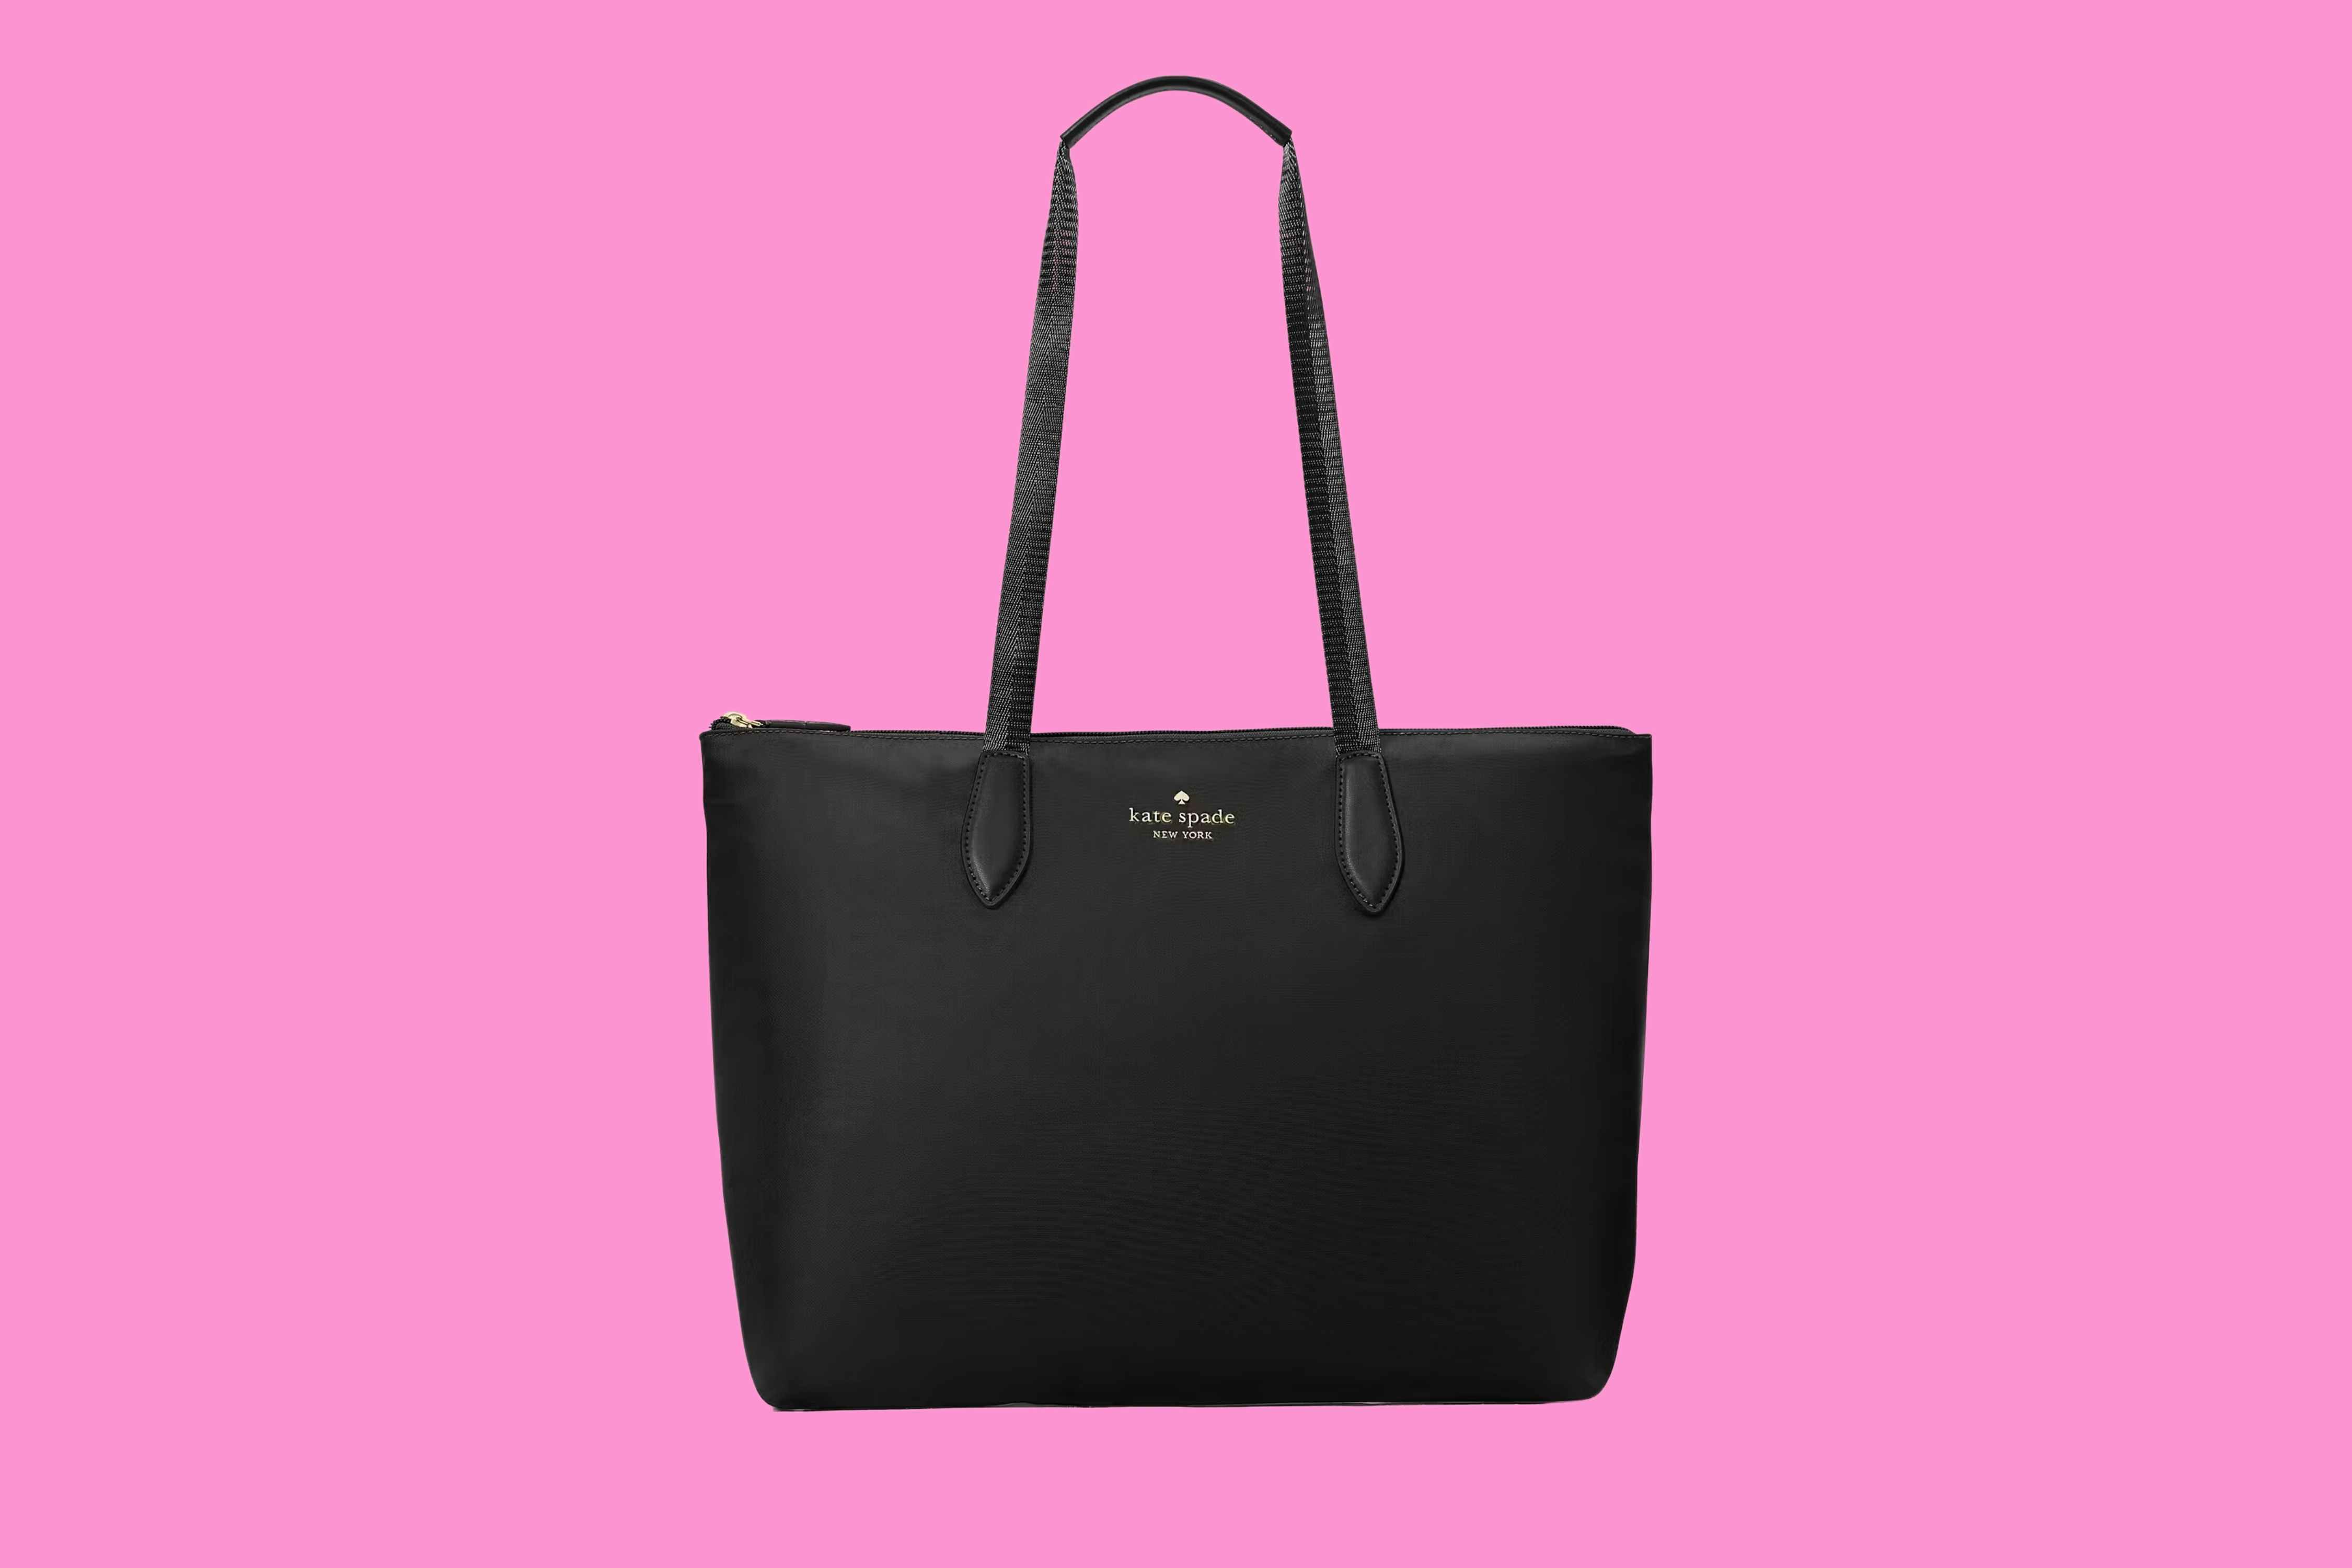 Kate Spade Tote, Only $79 Shipped (Reg. $299)